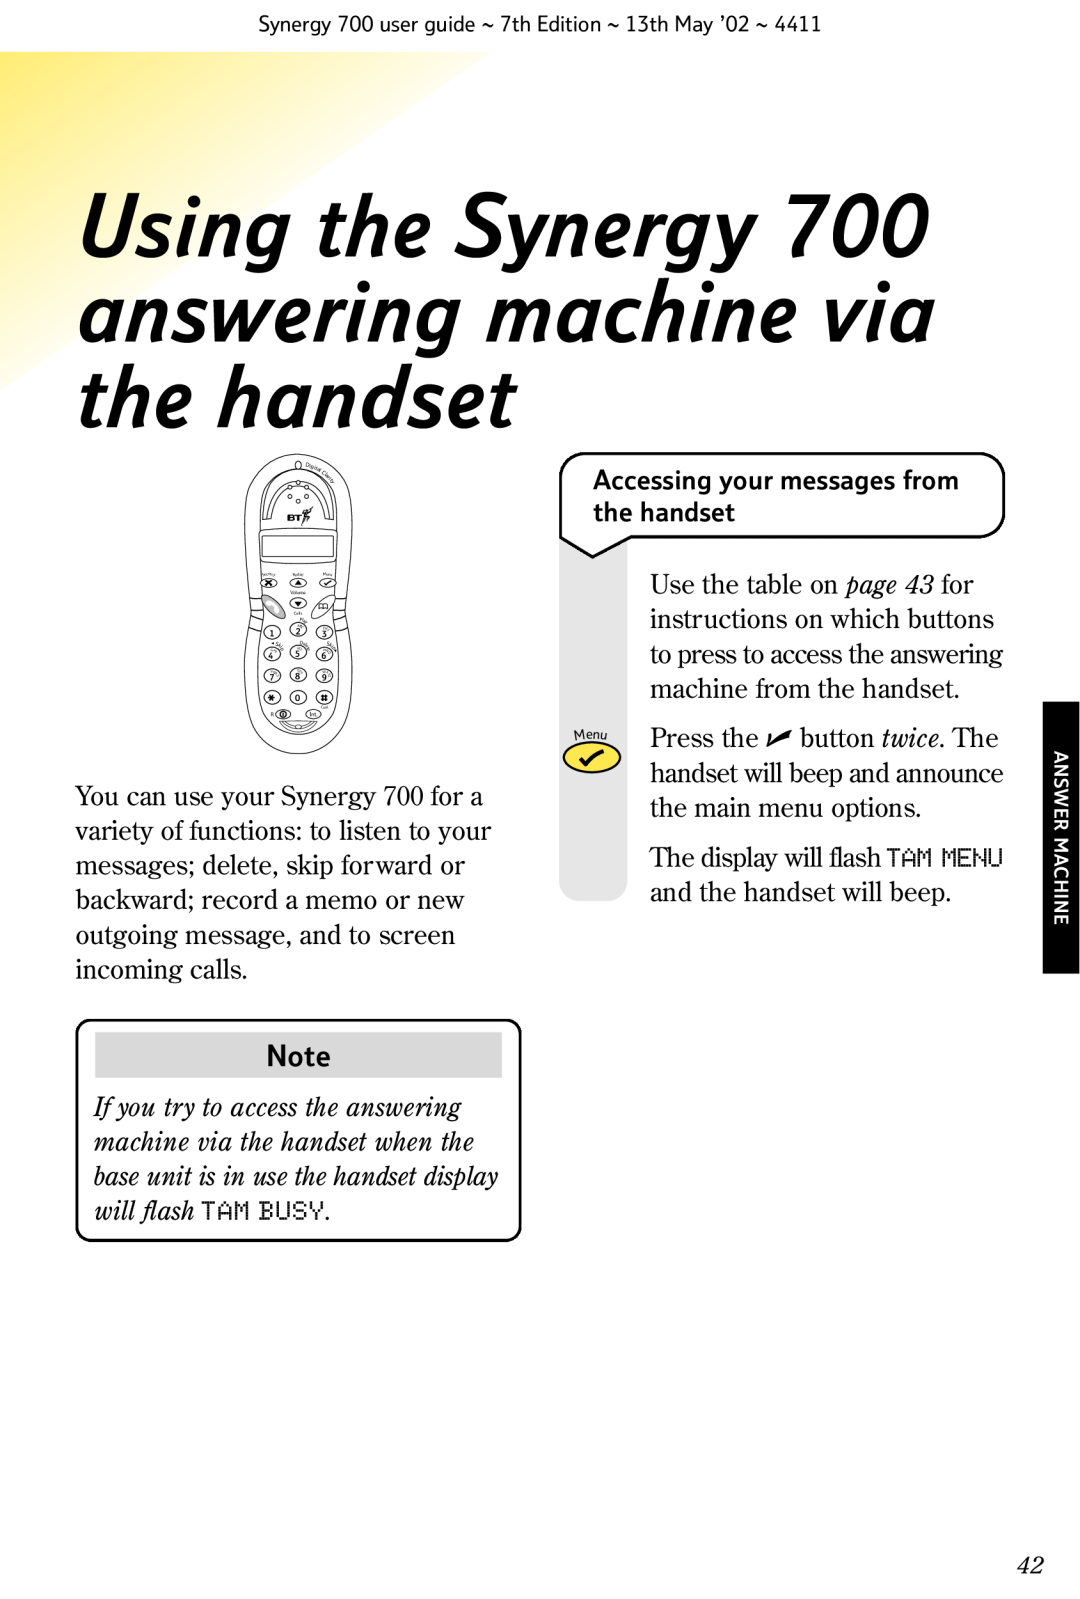 BT Using the Synergy 700 answering machine via the handset, Accessing your messages from, Use the table on page 43 for 